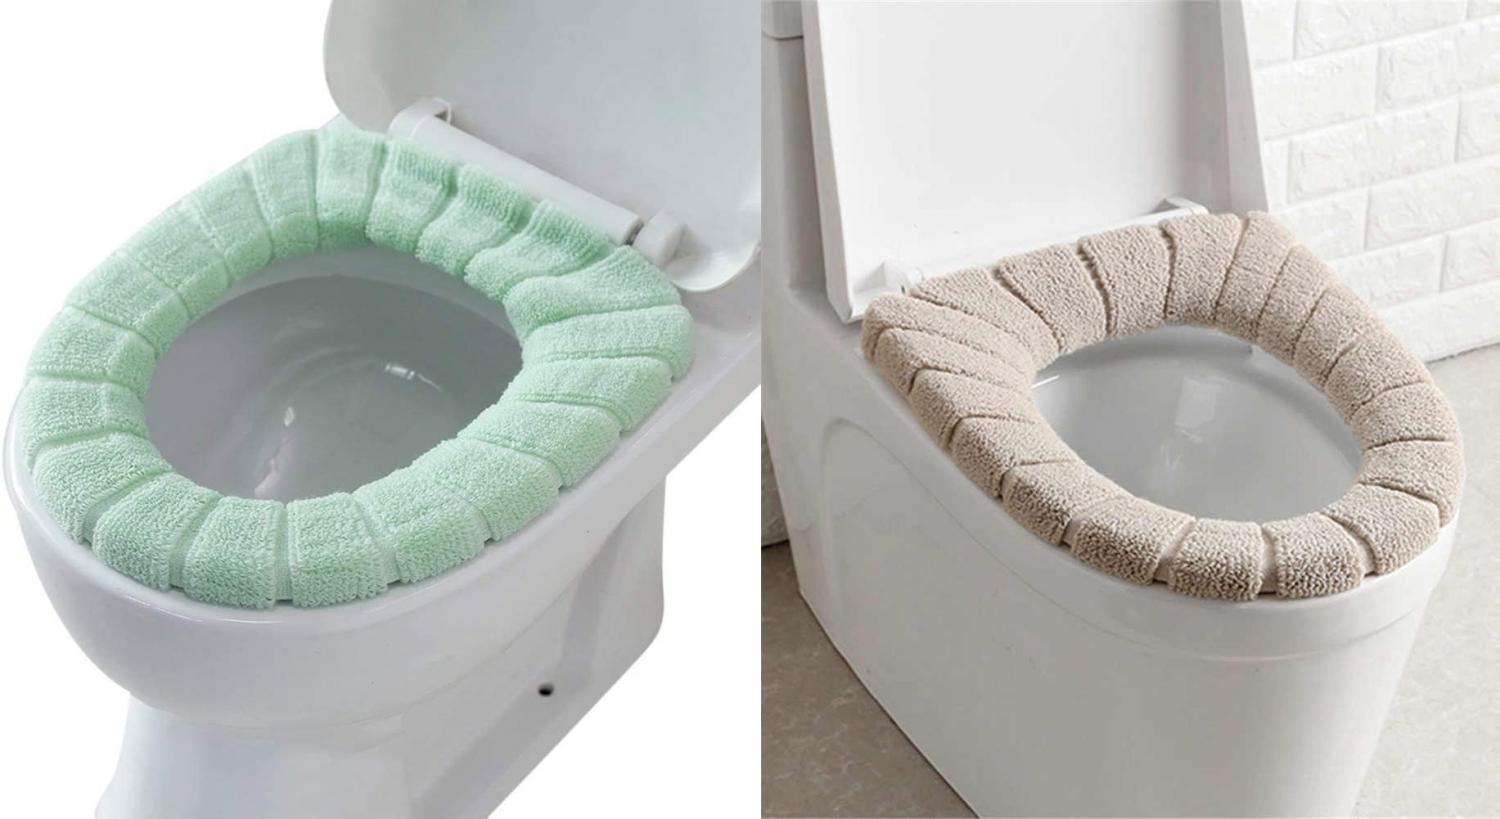 Super Soft Padded Toilet Seat Cover - Fabric warm toilet seat cover